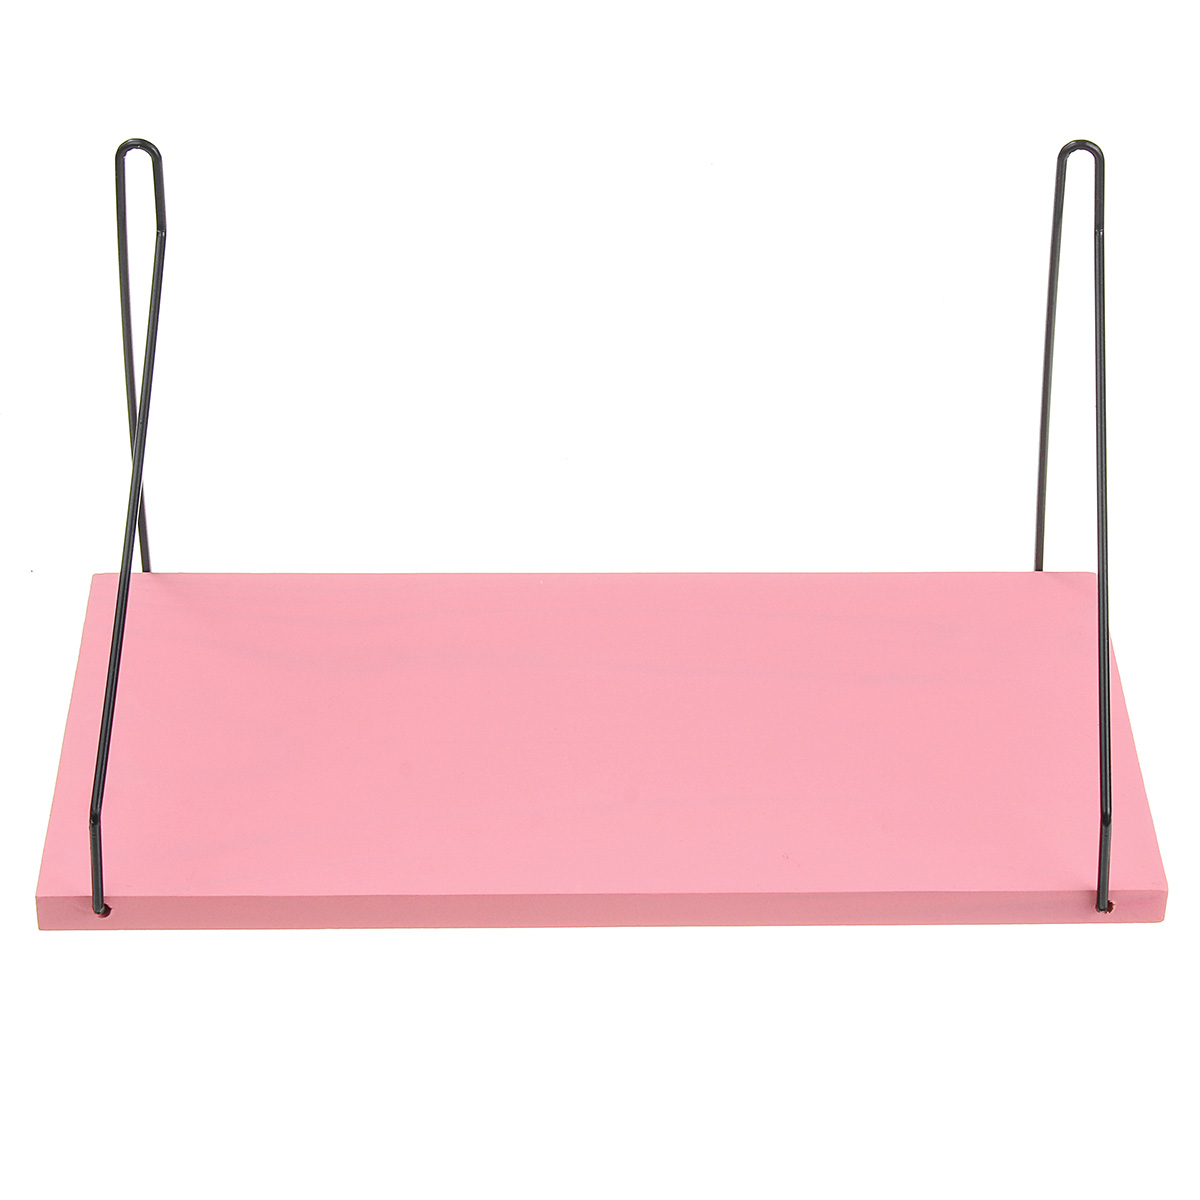 1PC-Length-30CM40CM50CM-Pink-Wall-Mounted-Industrial-Retro-Assemble-Wood-Shelf-Organization-For-Indo-1587220-2